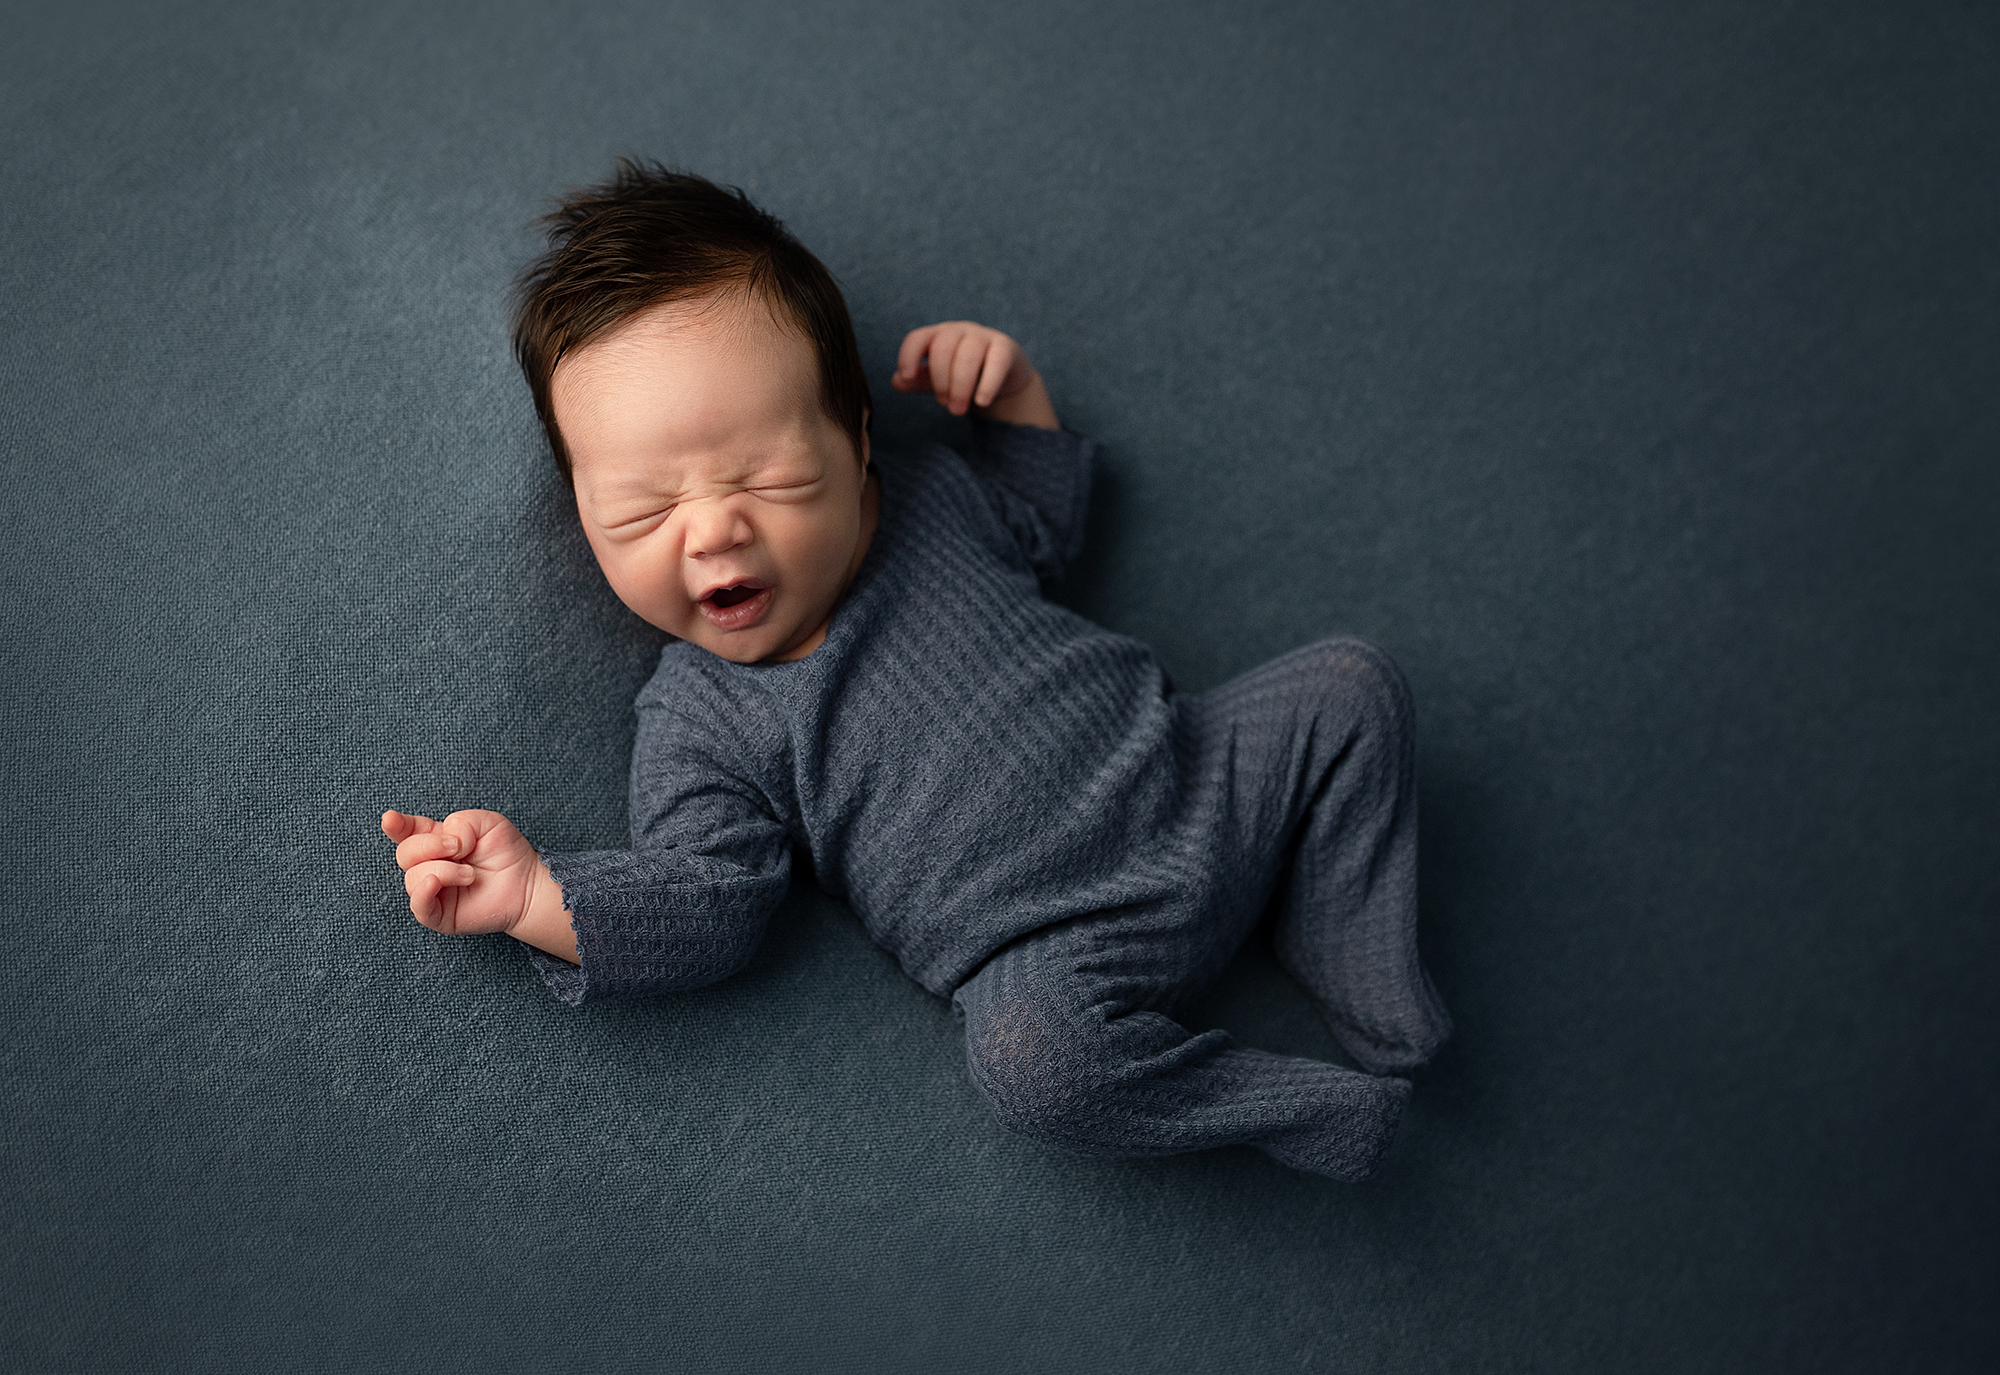 Cute Photoshoot Of A Small Baby